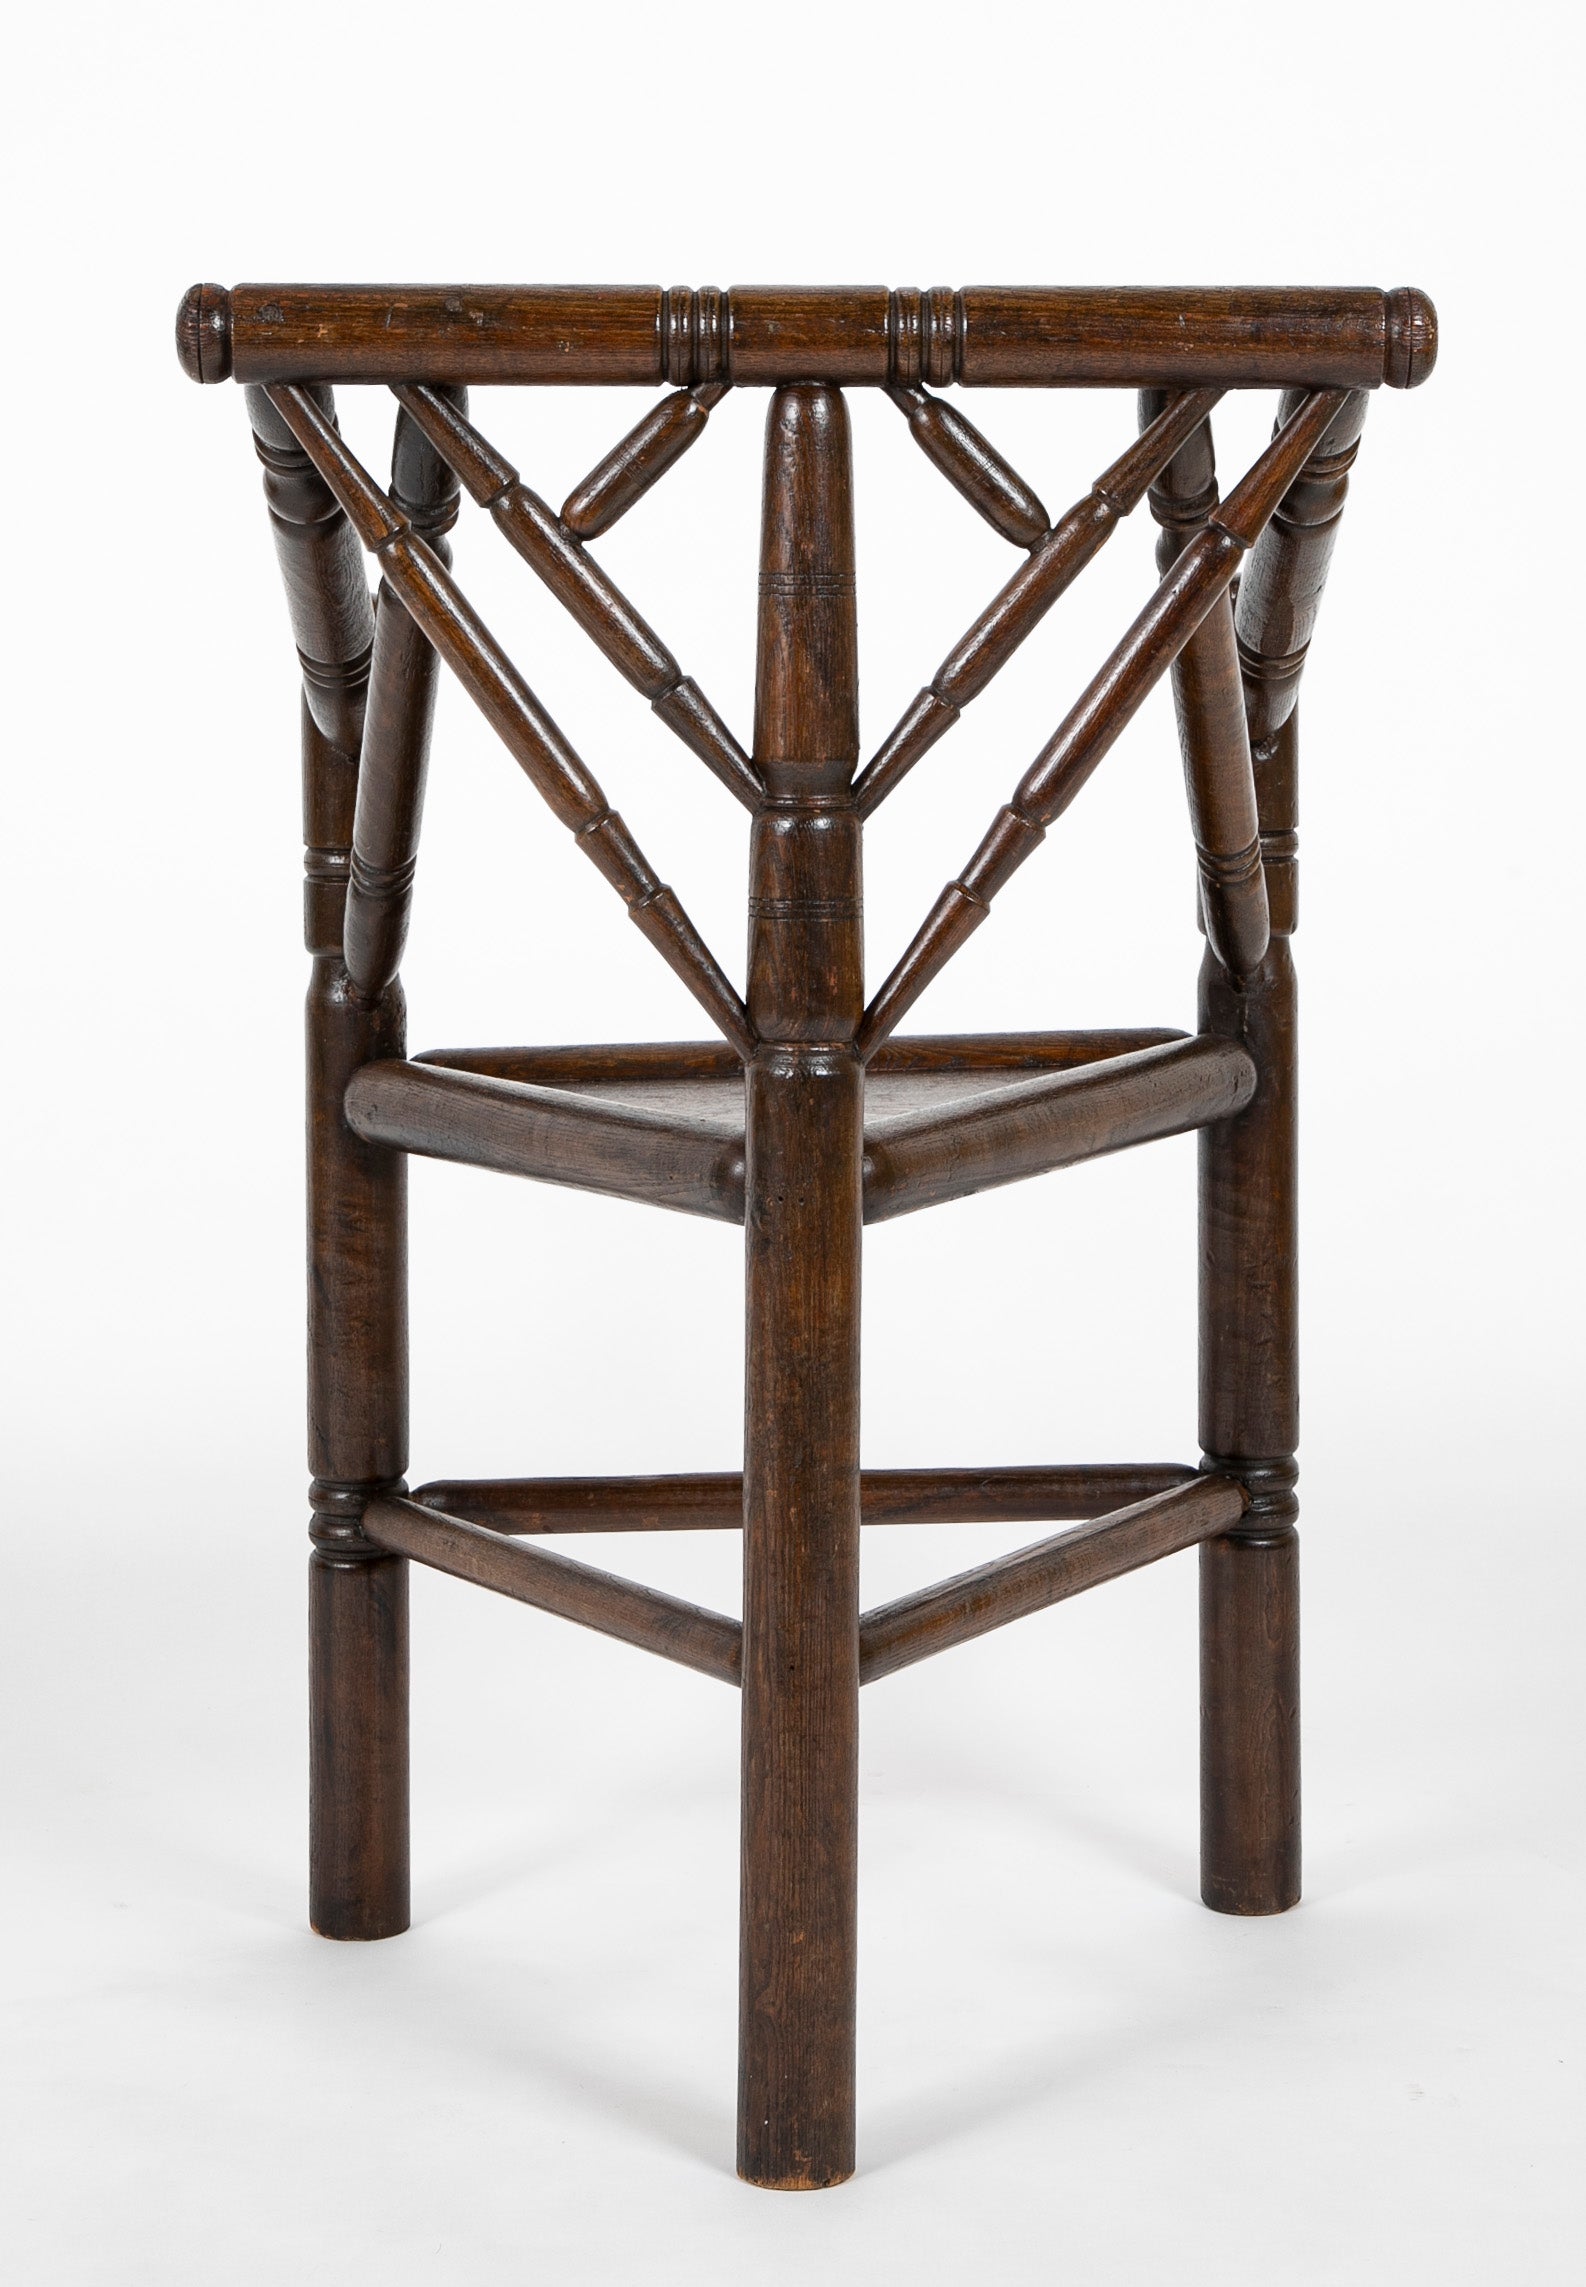 Jacobean Style 3 Legged Chair with Plank Seat & Turned Spindles